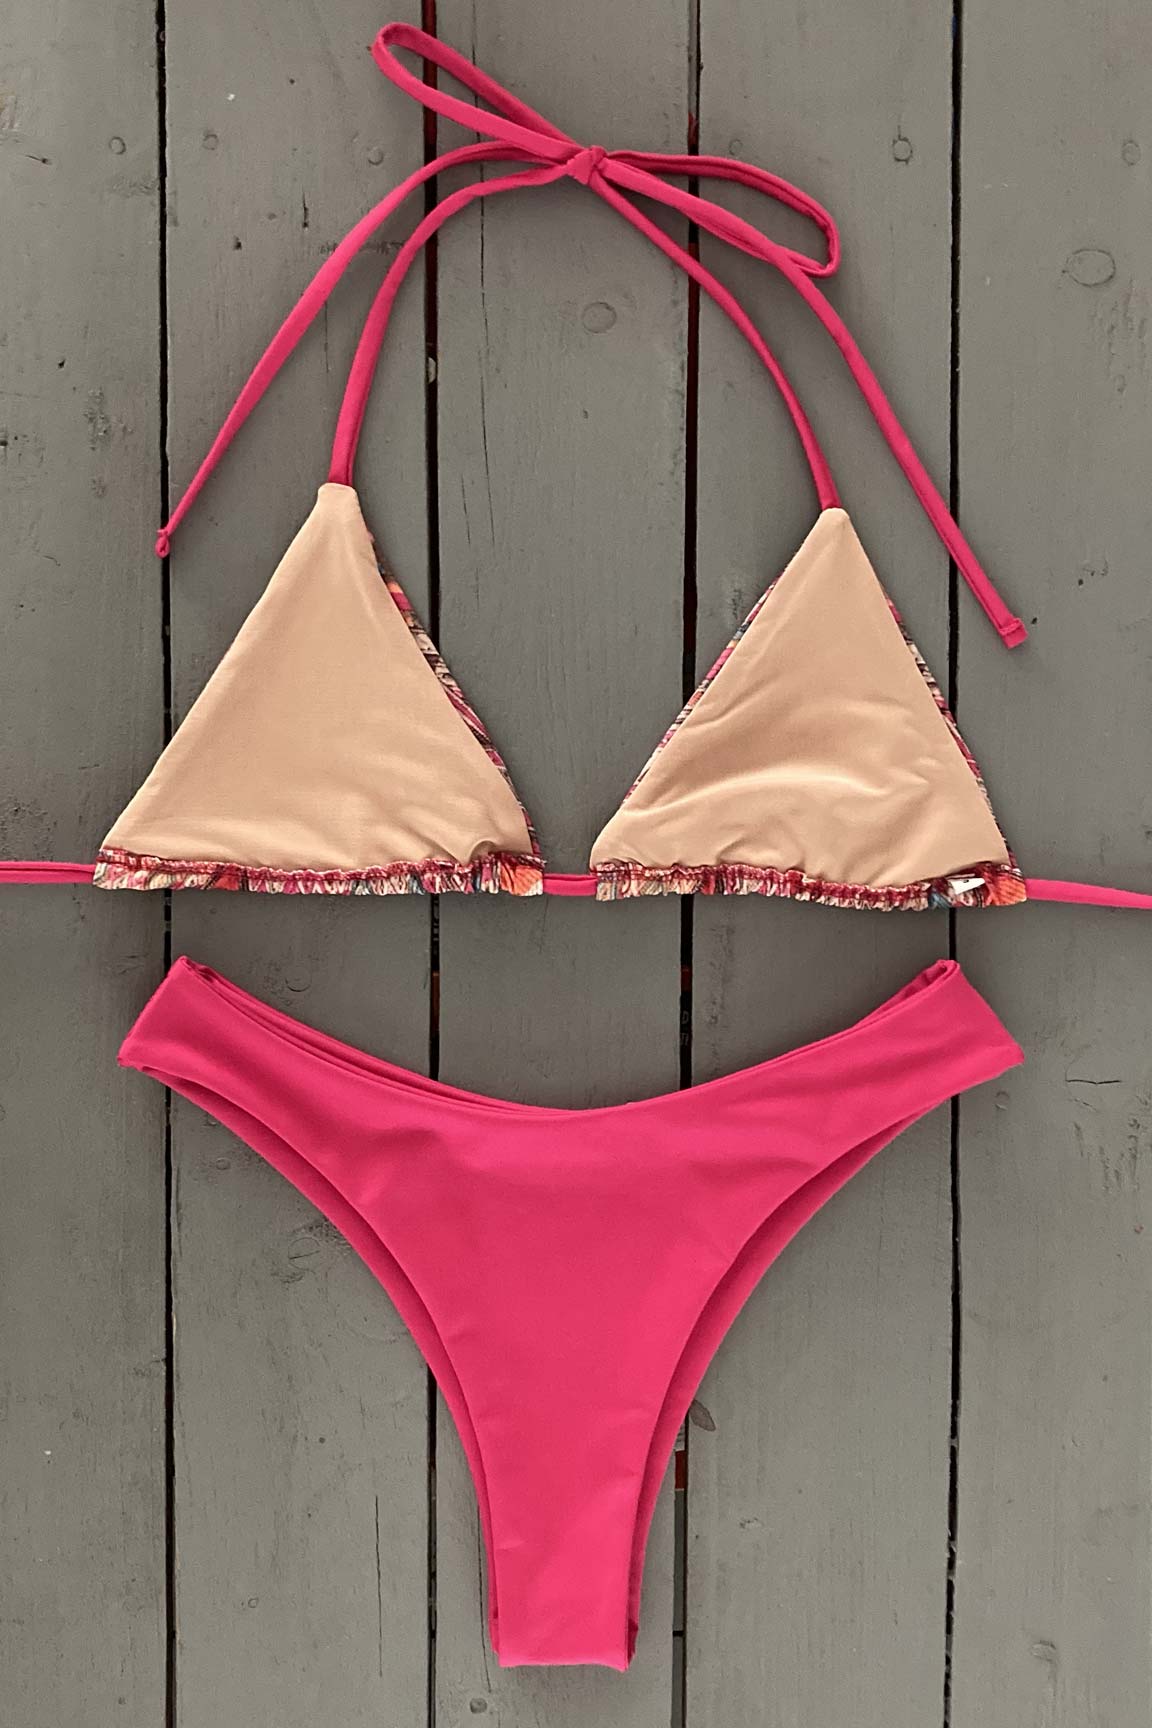 Splash around by the pool this summer in this super cute adjustable triangle bikini top. Made with the finest quality of soft and stretchy Lycra to achieve the best fit.  Compliment your look by matching with our thong bikini bottom. Order yours today. @jillesbikinis 